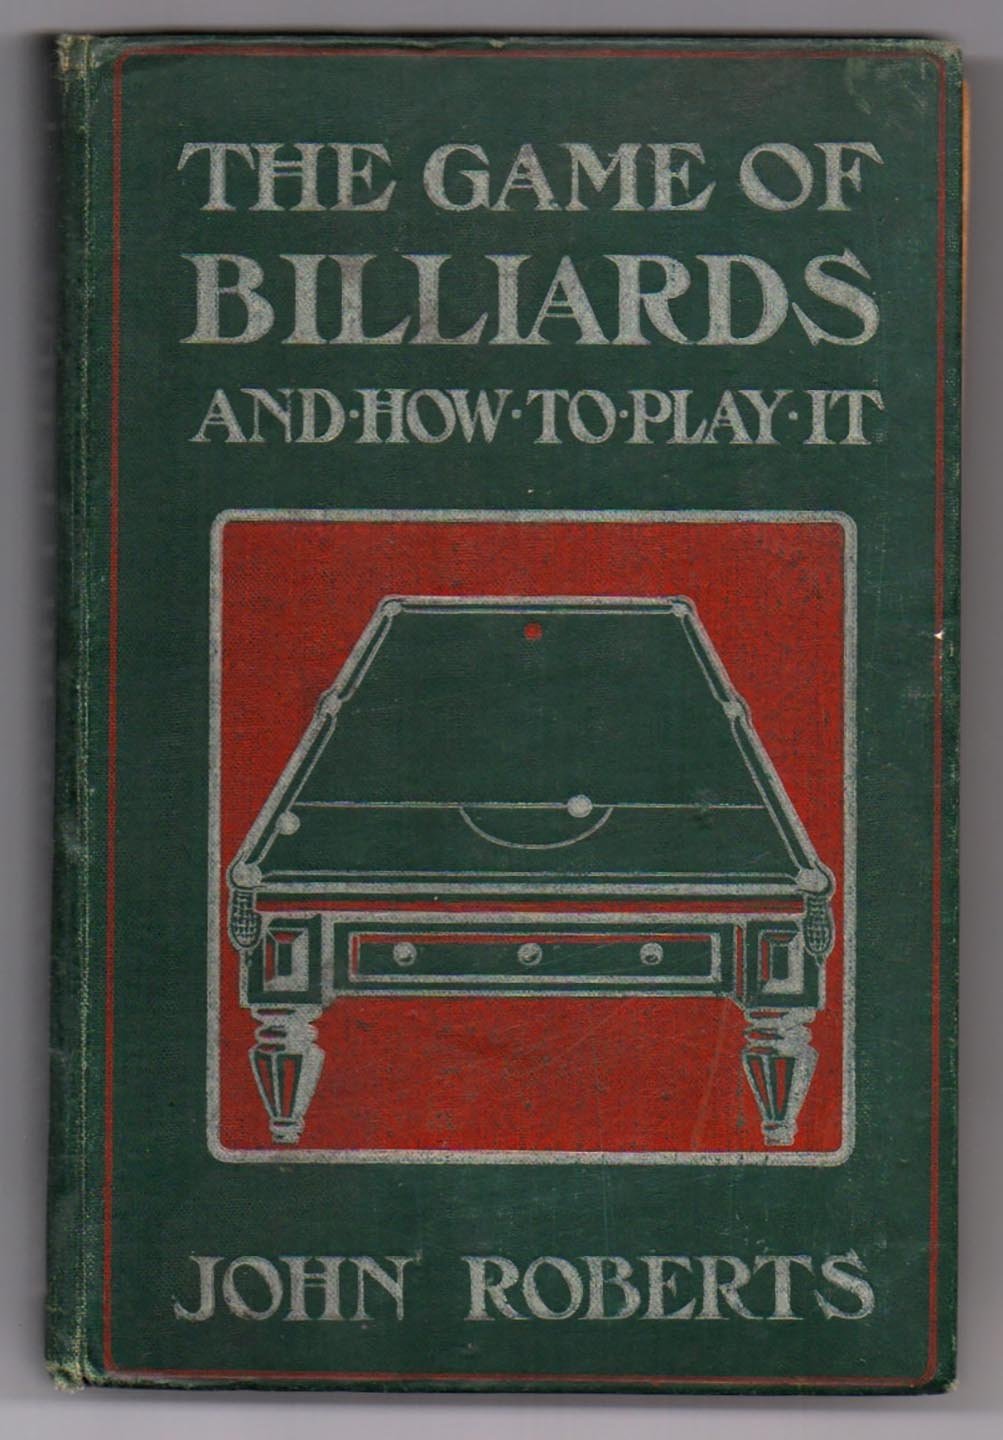 The Game of Billiards and How To Play It